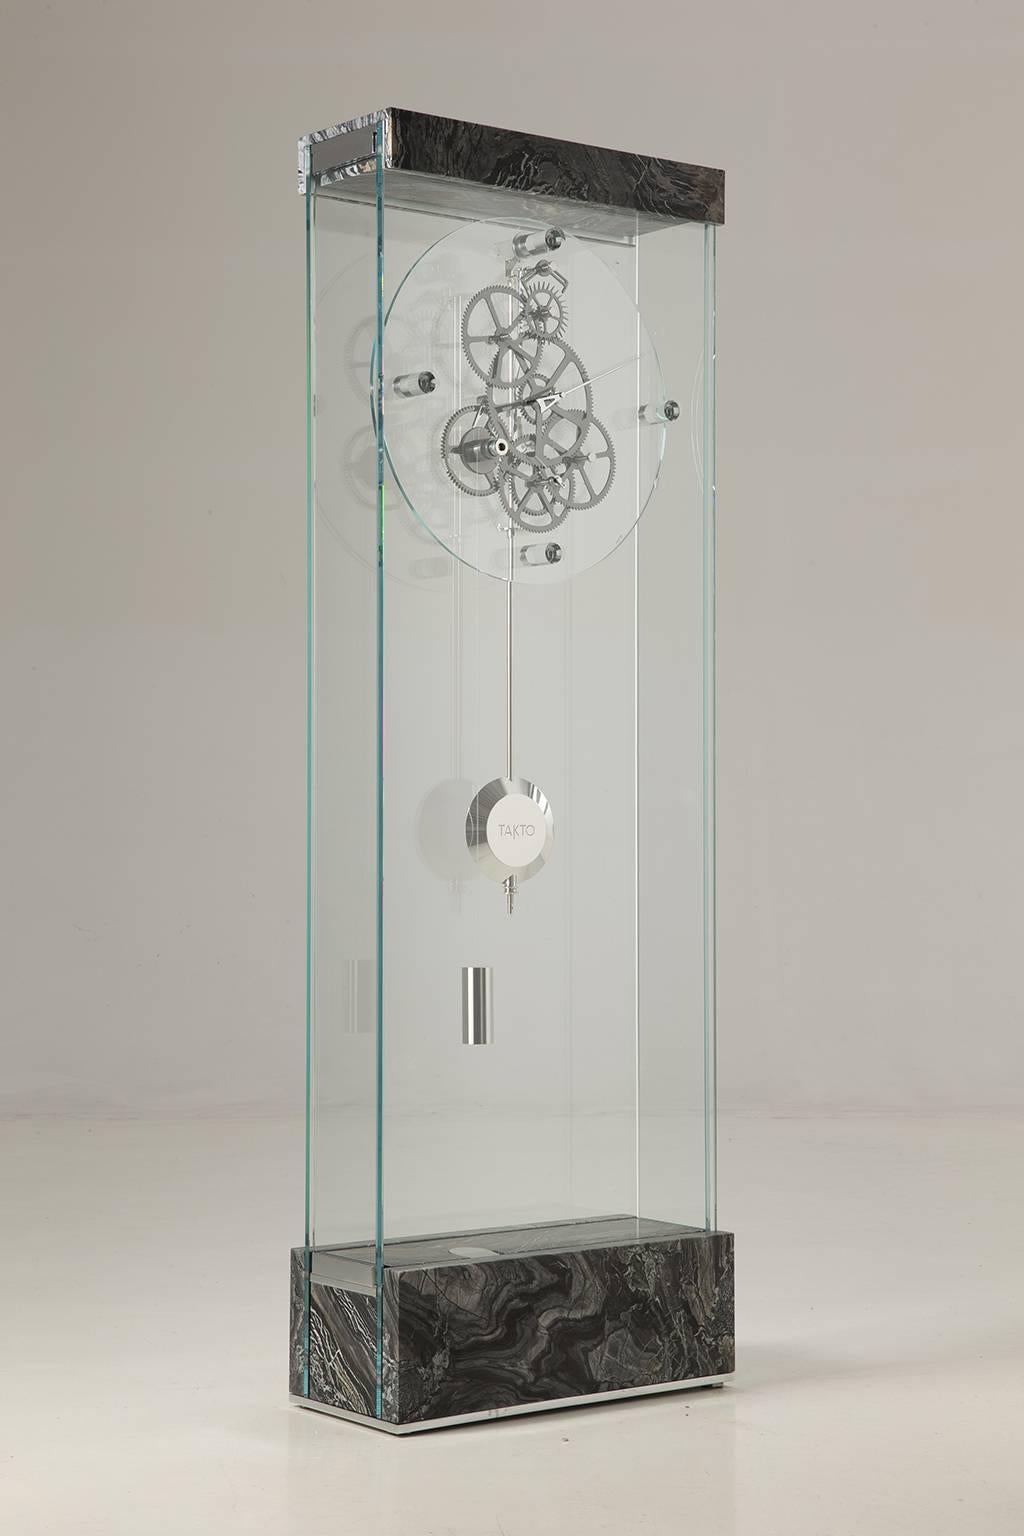 Mechanical modern style grandfather oversized glass mechanical clock with Graham escapement, DLC coated gears and pinions, stainless steel arbor, revolution on 15 ball bearings, bearings attached and adjusted directly on the crystal structure via